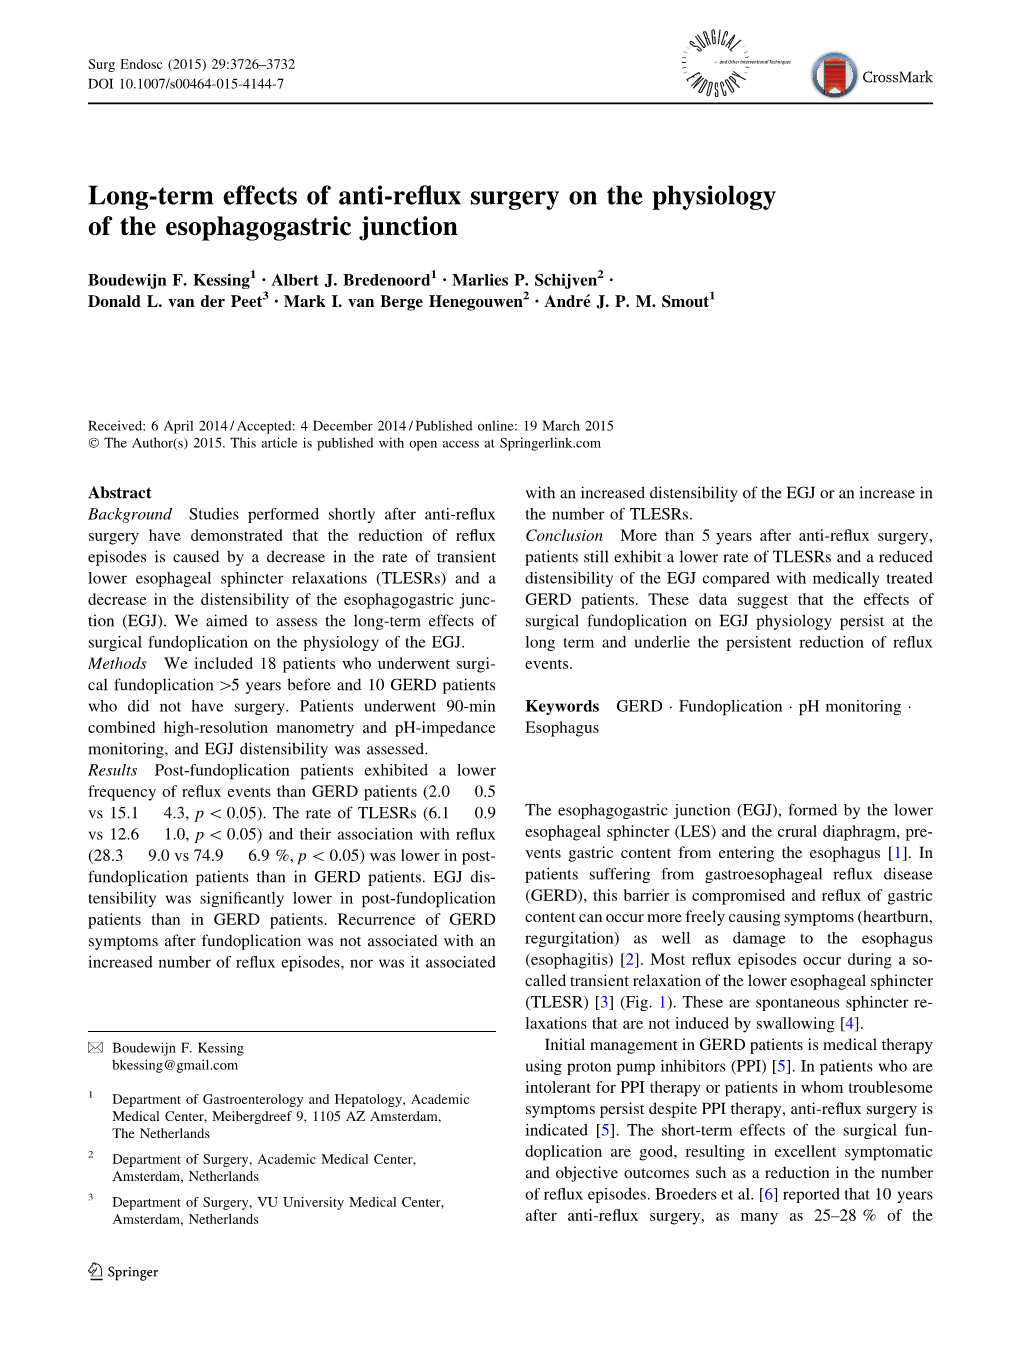 Long-Term Effects of Anti-Reflux Surgery on the Physiology of The